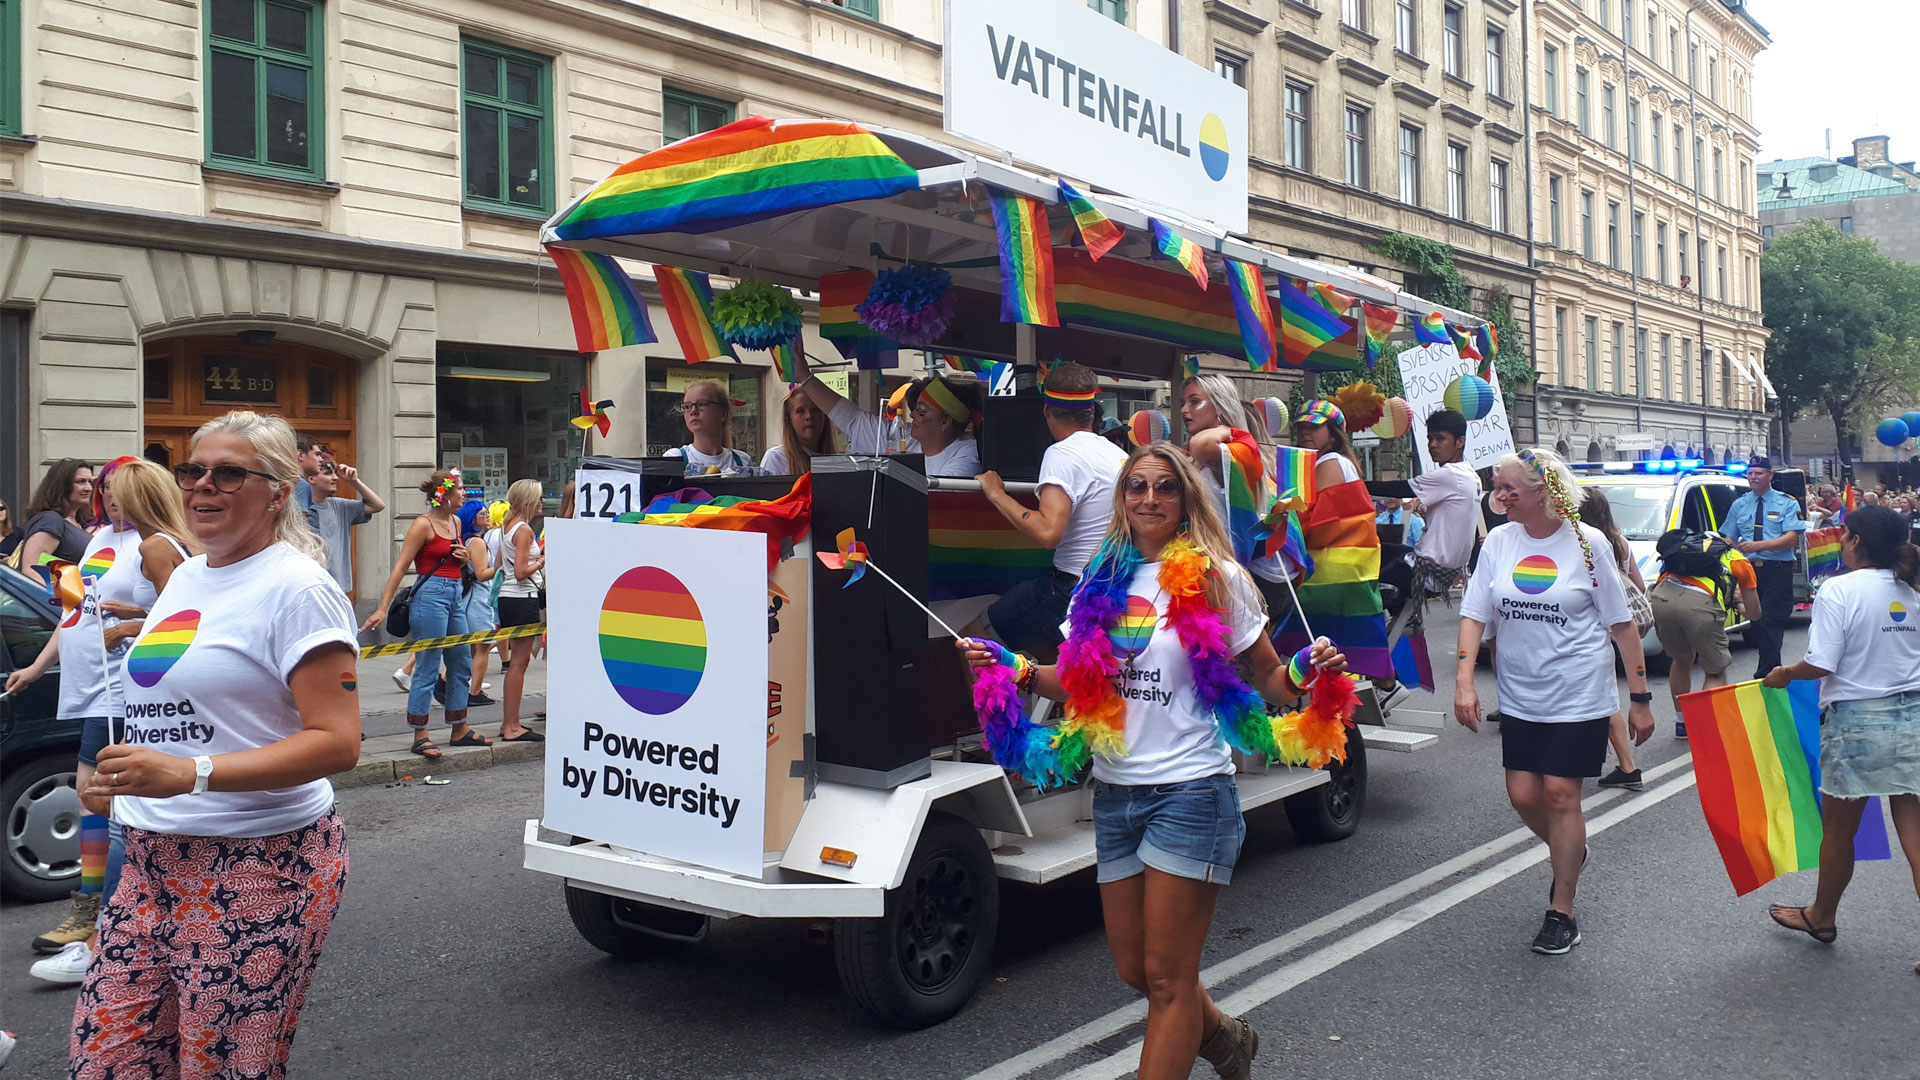 Pride parades and rainbow charging points Vattenfall